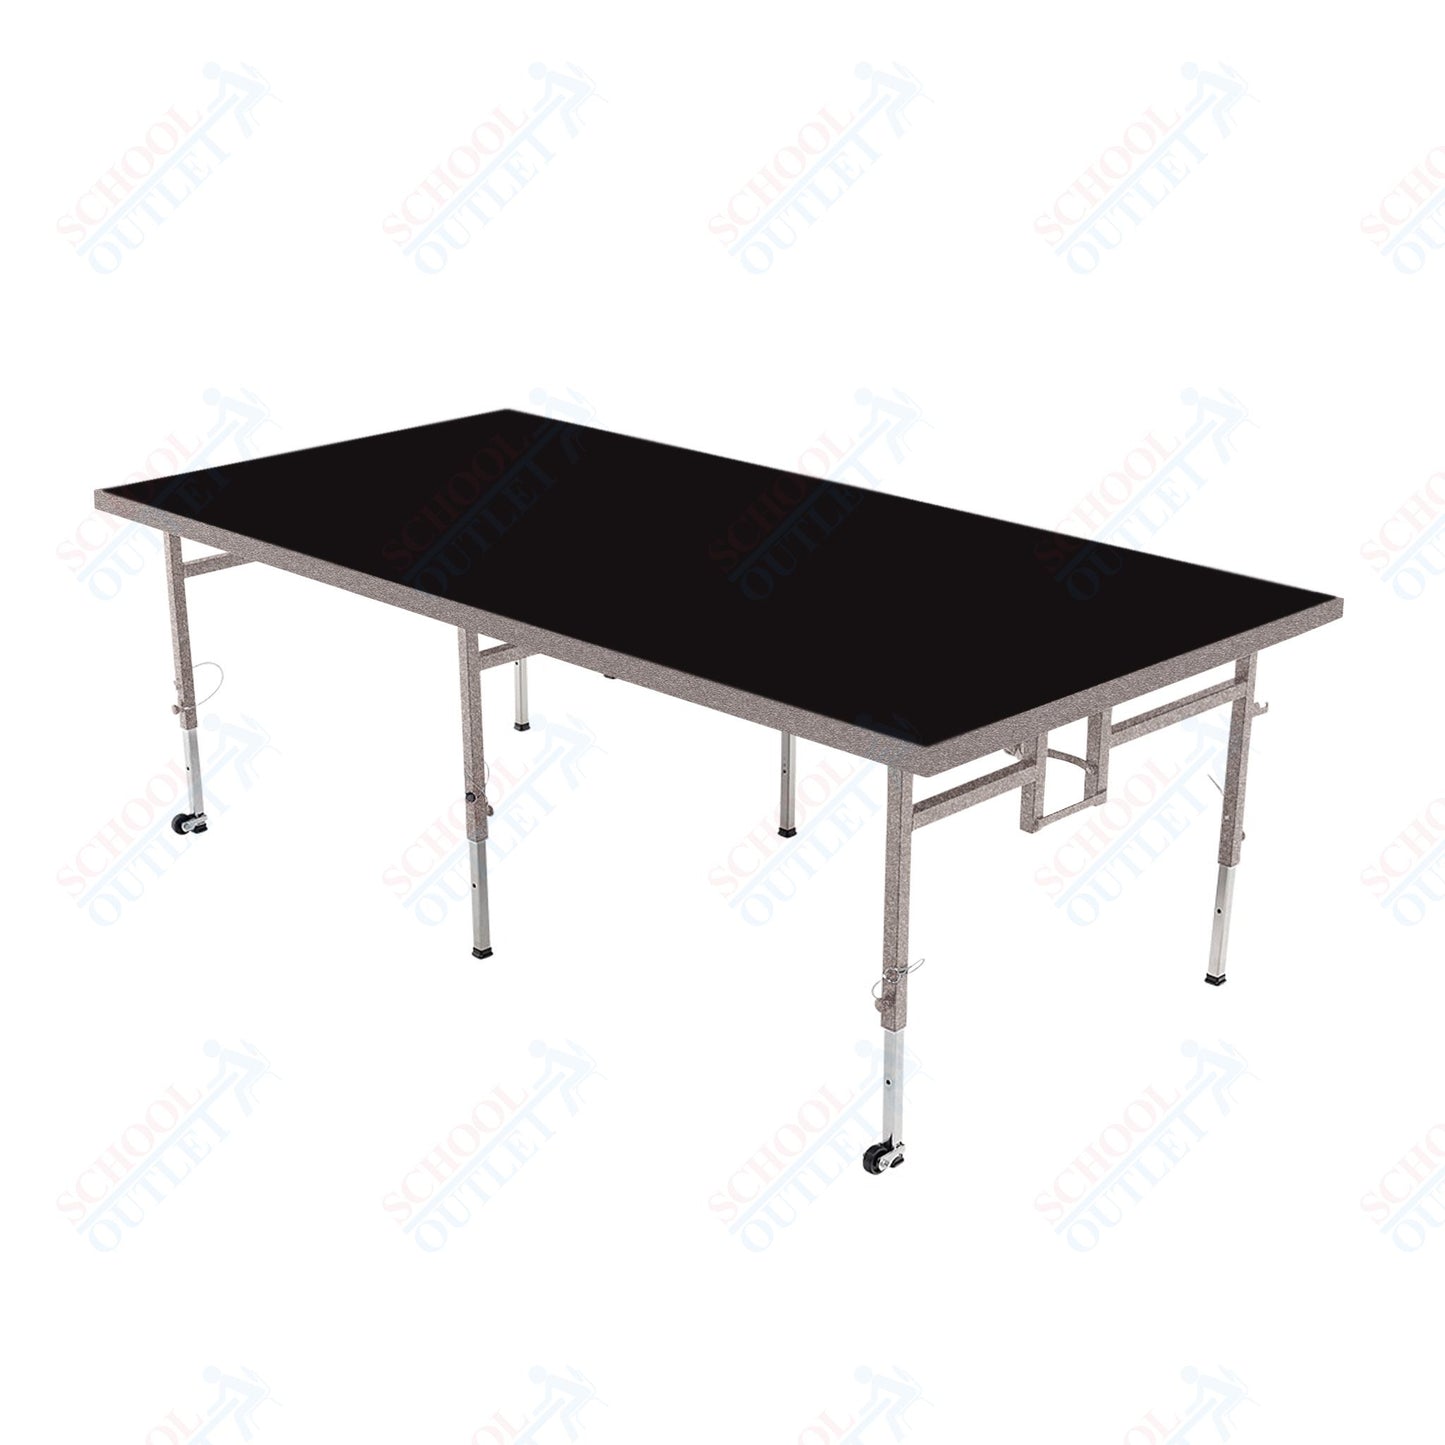 AmTab Adjustable Height Stage - Polypropylene Top - 48"W x 96"L x Adjustable 16" to 24"H  (AmTab AMT-STA4816P)